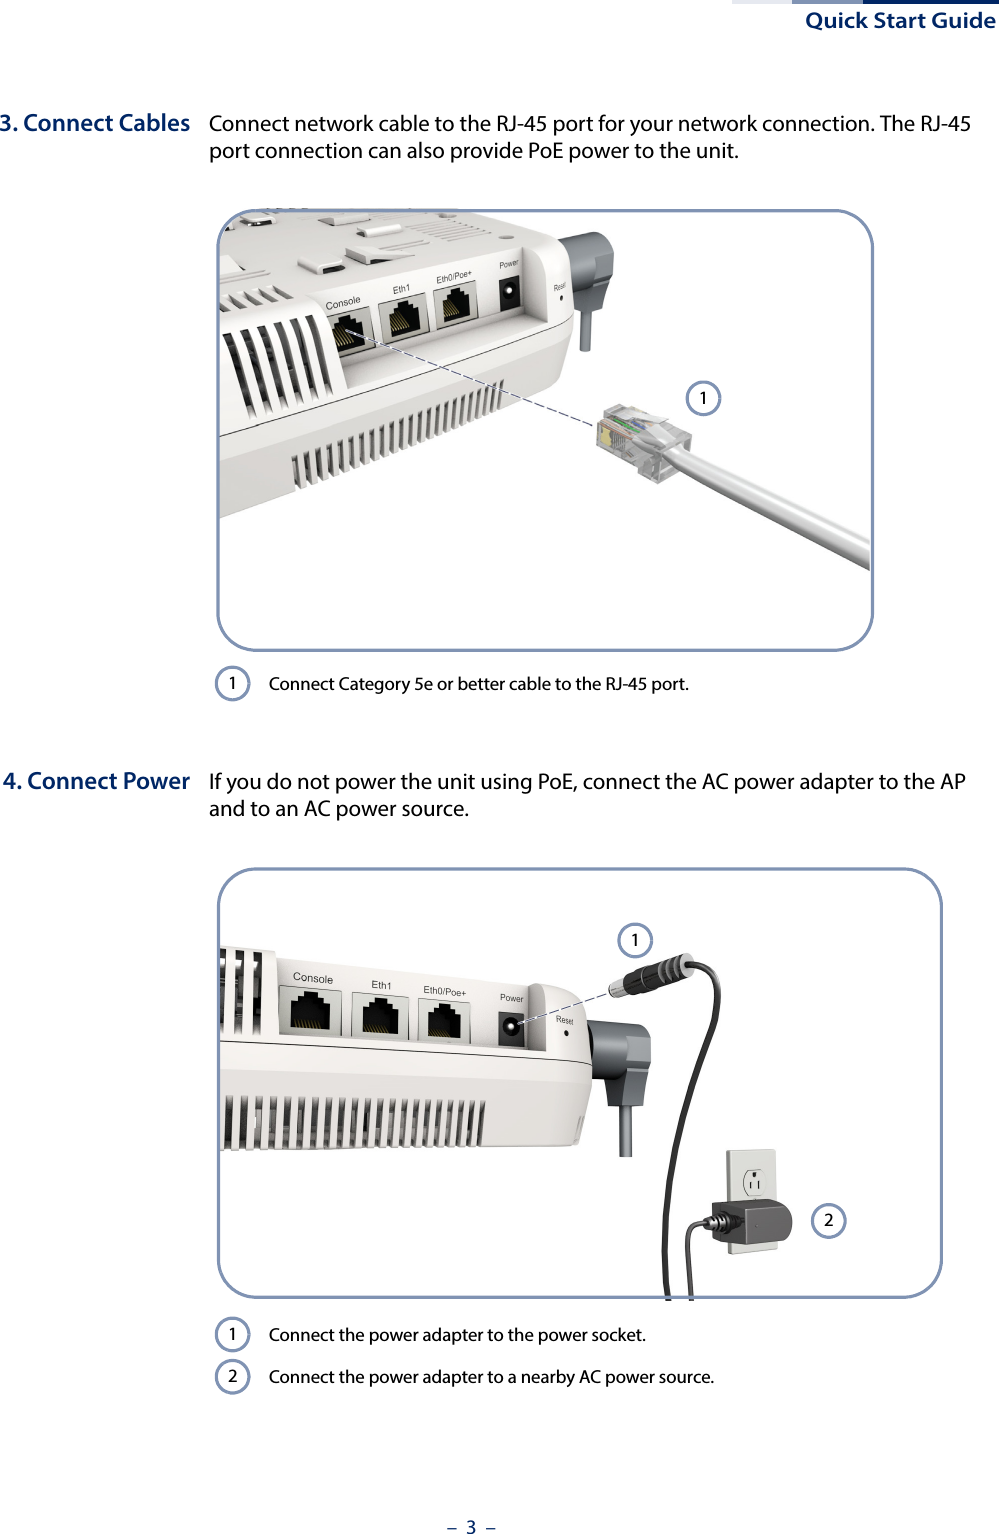 Quick Start Guide–  3  –3. Connect Cables Connect network cable to the RJ-45 port for your network connection. The RJ-45 port connection can also provide PoE power to the unit.4. Connect Power If you do not power the unit using PoE, connect the AC power adapter to the AP and to an AC power source.Connect Category 5e or better cable to the RJ-45 port.11Connect the power adapter to the power socket. Connect the power adapter to a nearby AC power source.1212